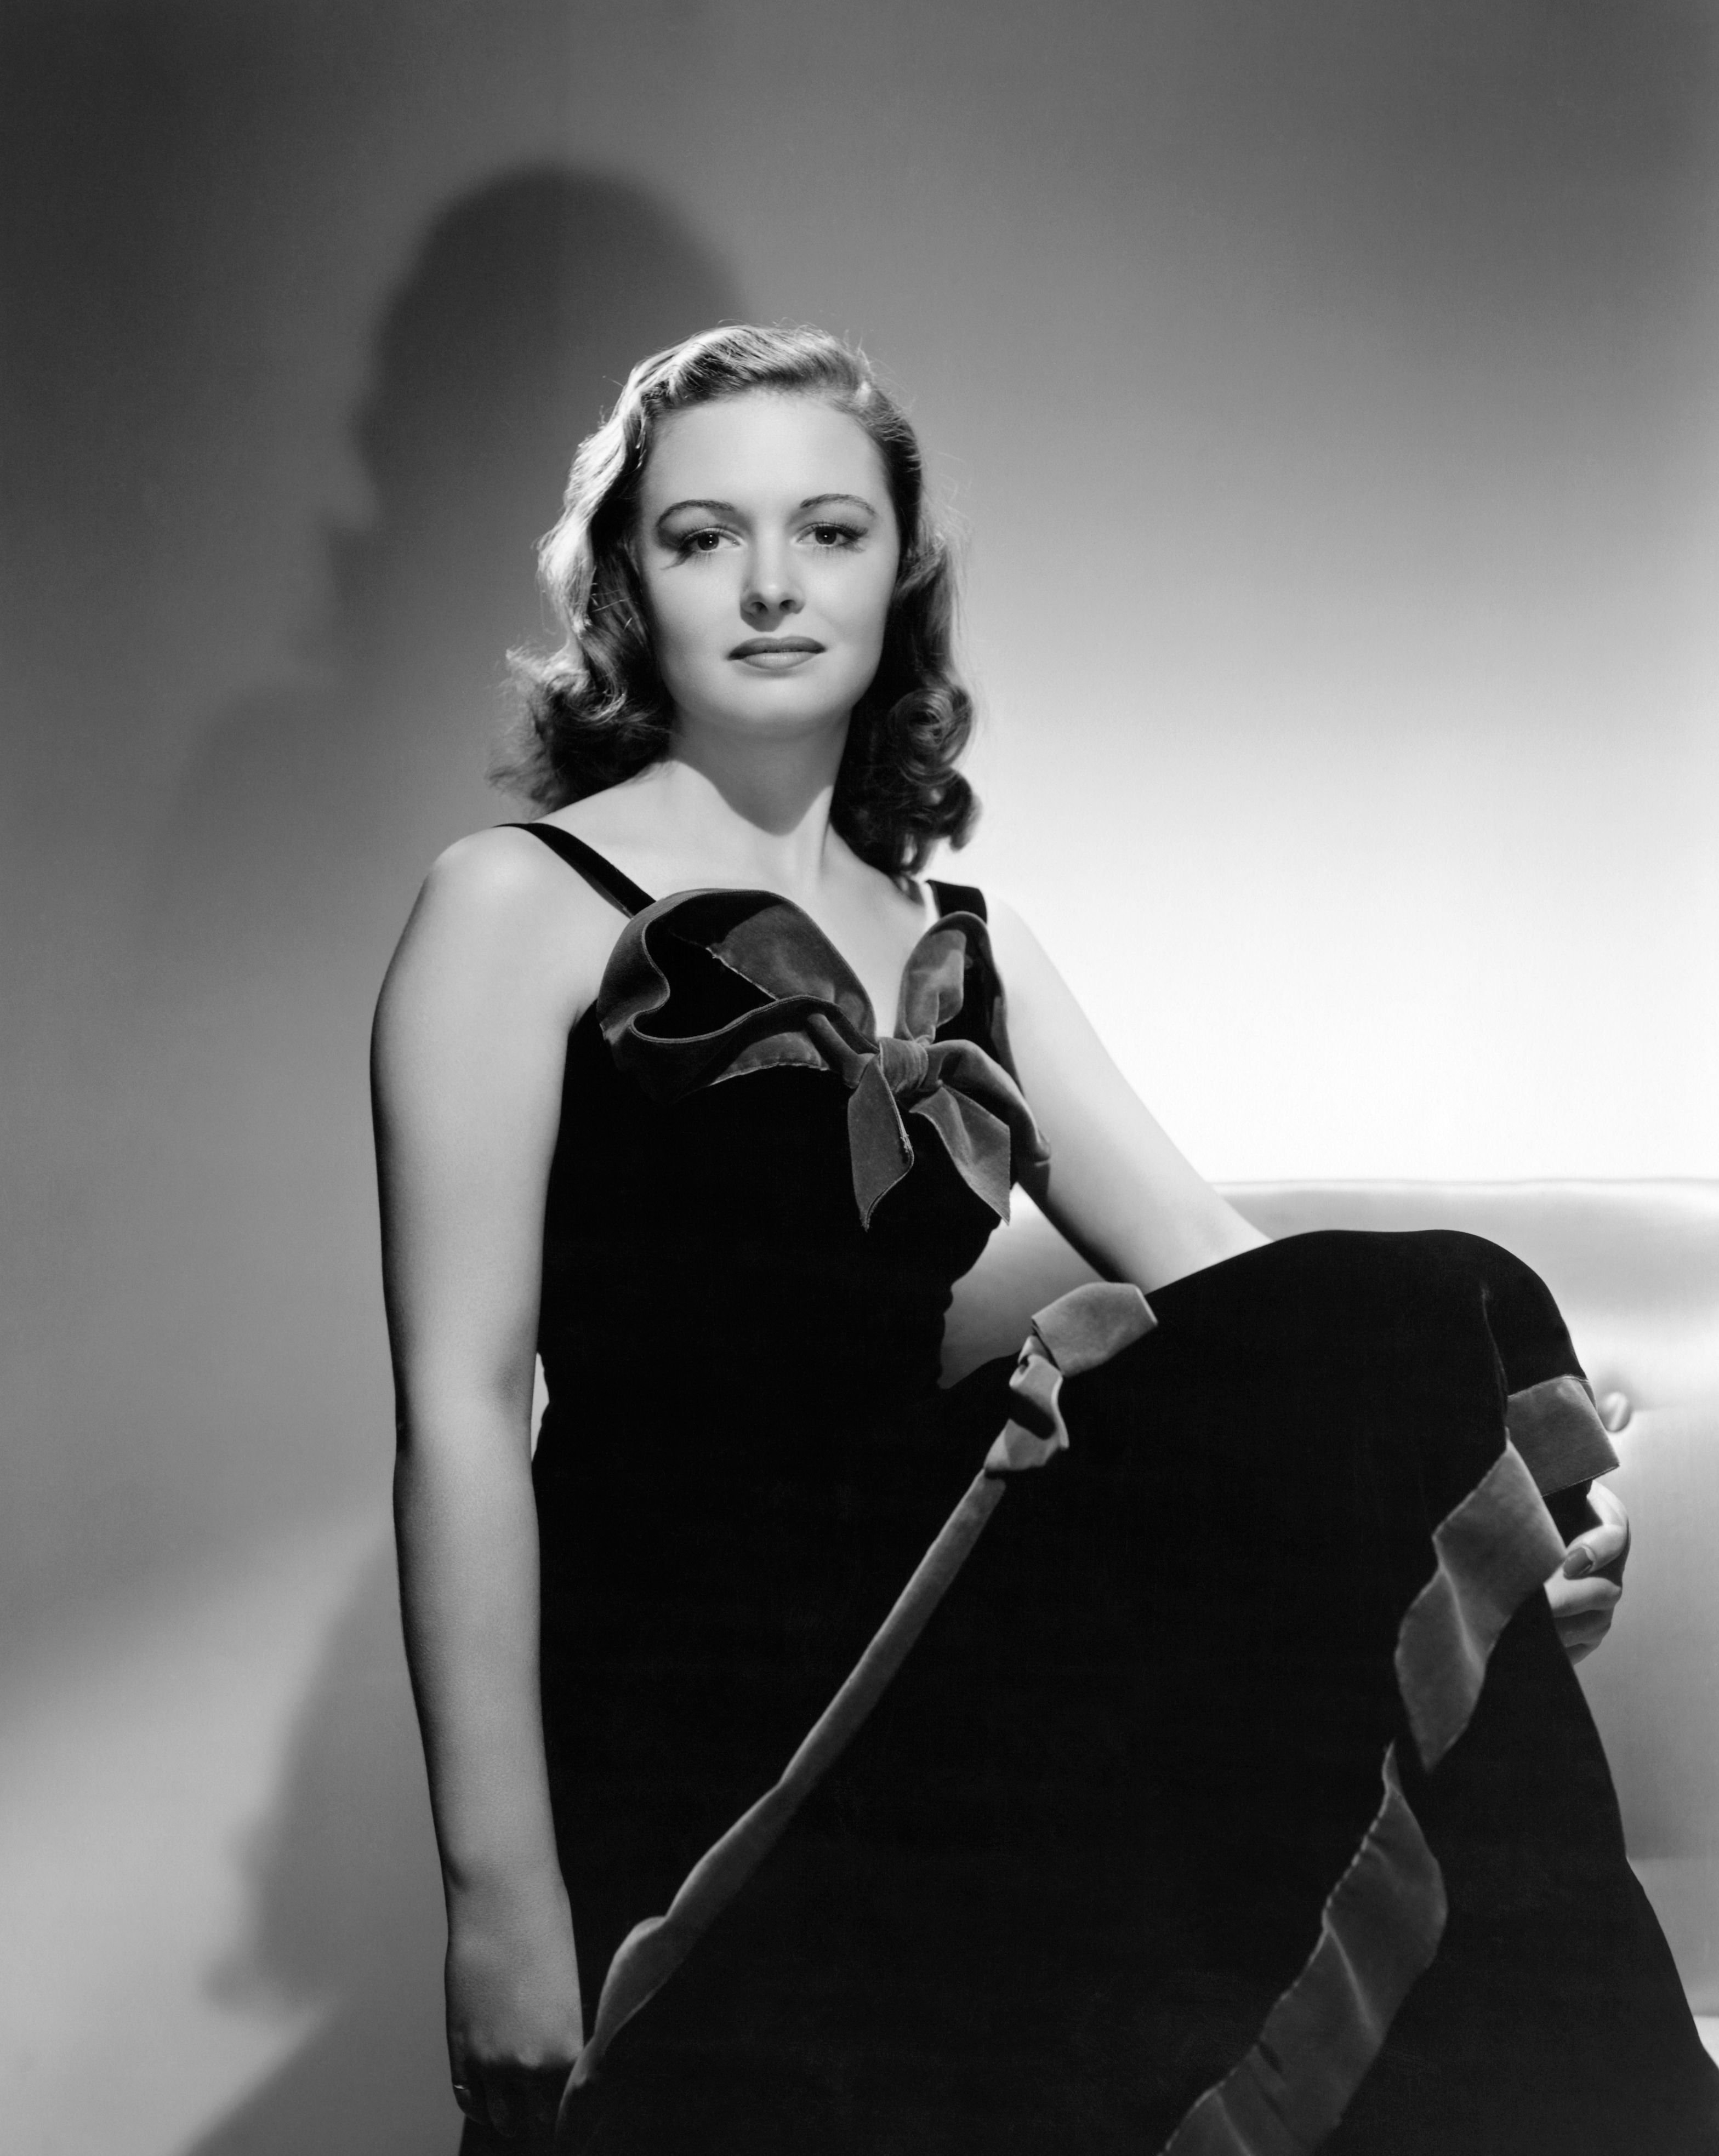 Donna Reed poses for her first sitting portrait in 1941 | Photo: John Springer Collection/CORBIS/Getty Images